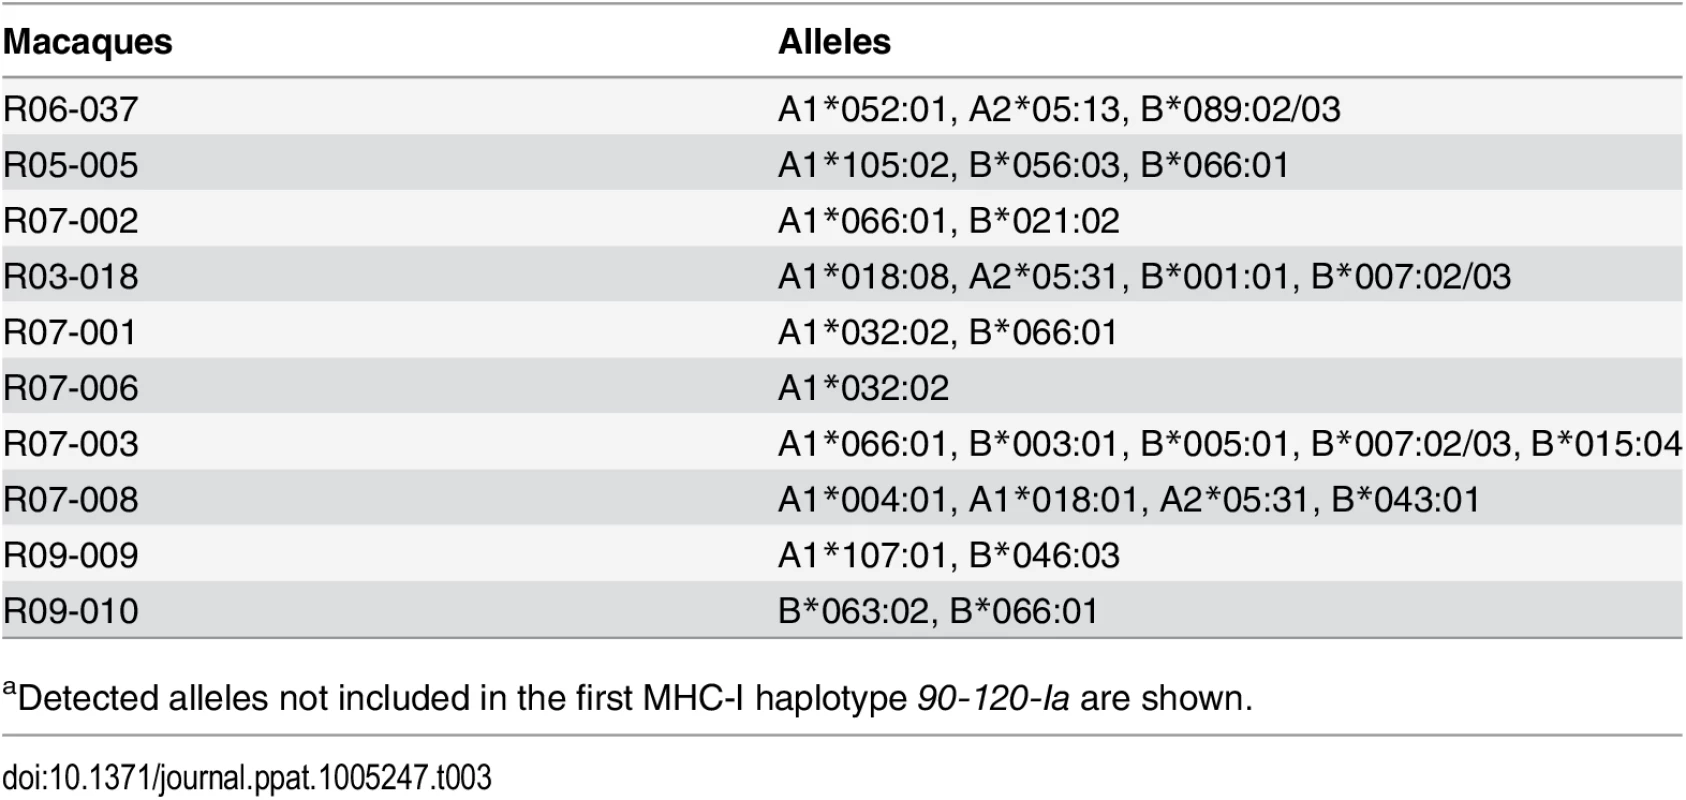 Alleles in the second MHC-I haplotypes in macaques<em class=&quot;ref&quot;><sup>a</sup></em>